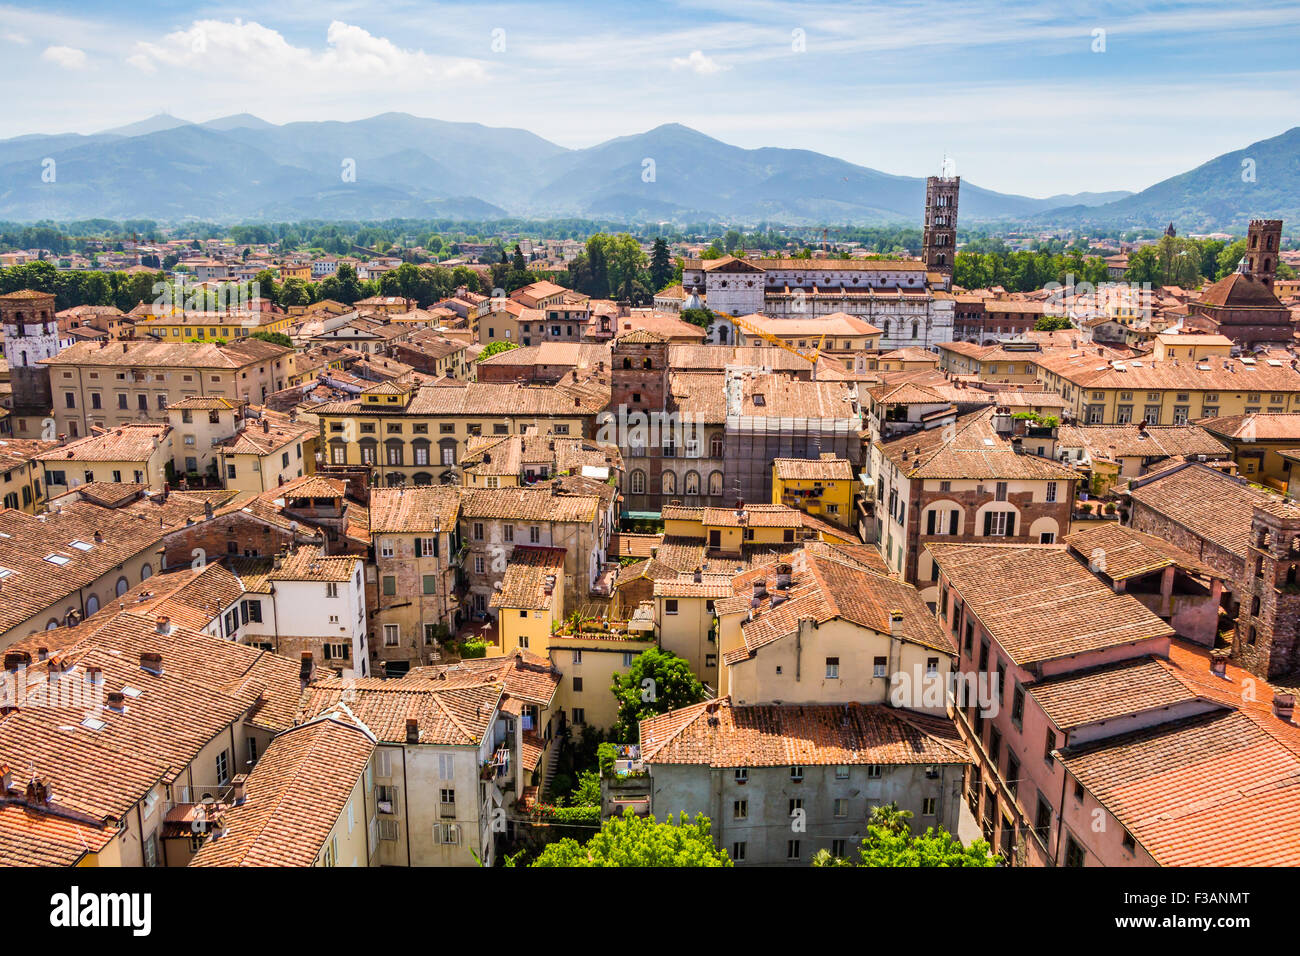 View over Italian town Lucca with typical terracotta roofs Stock Photo